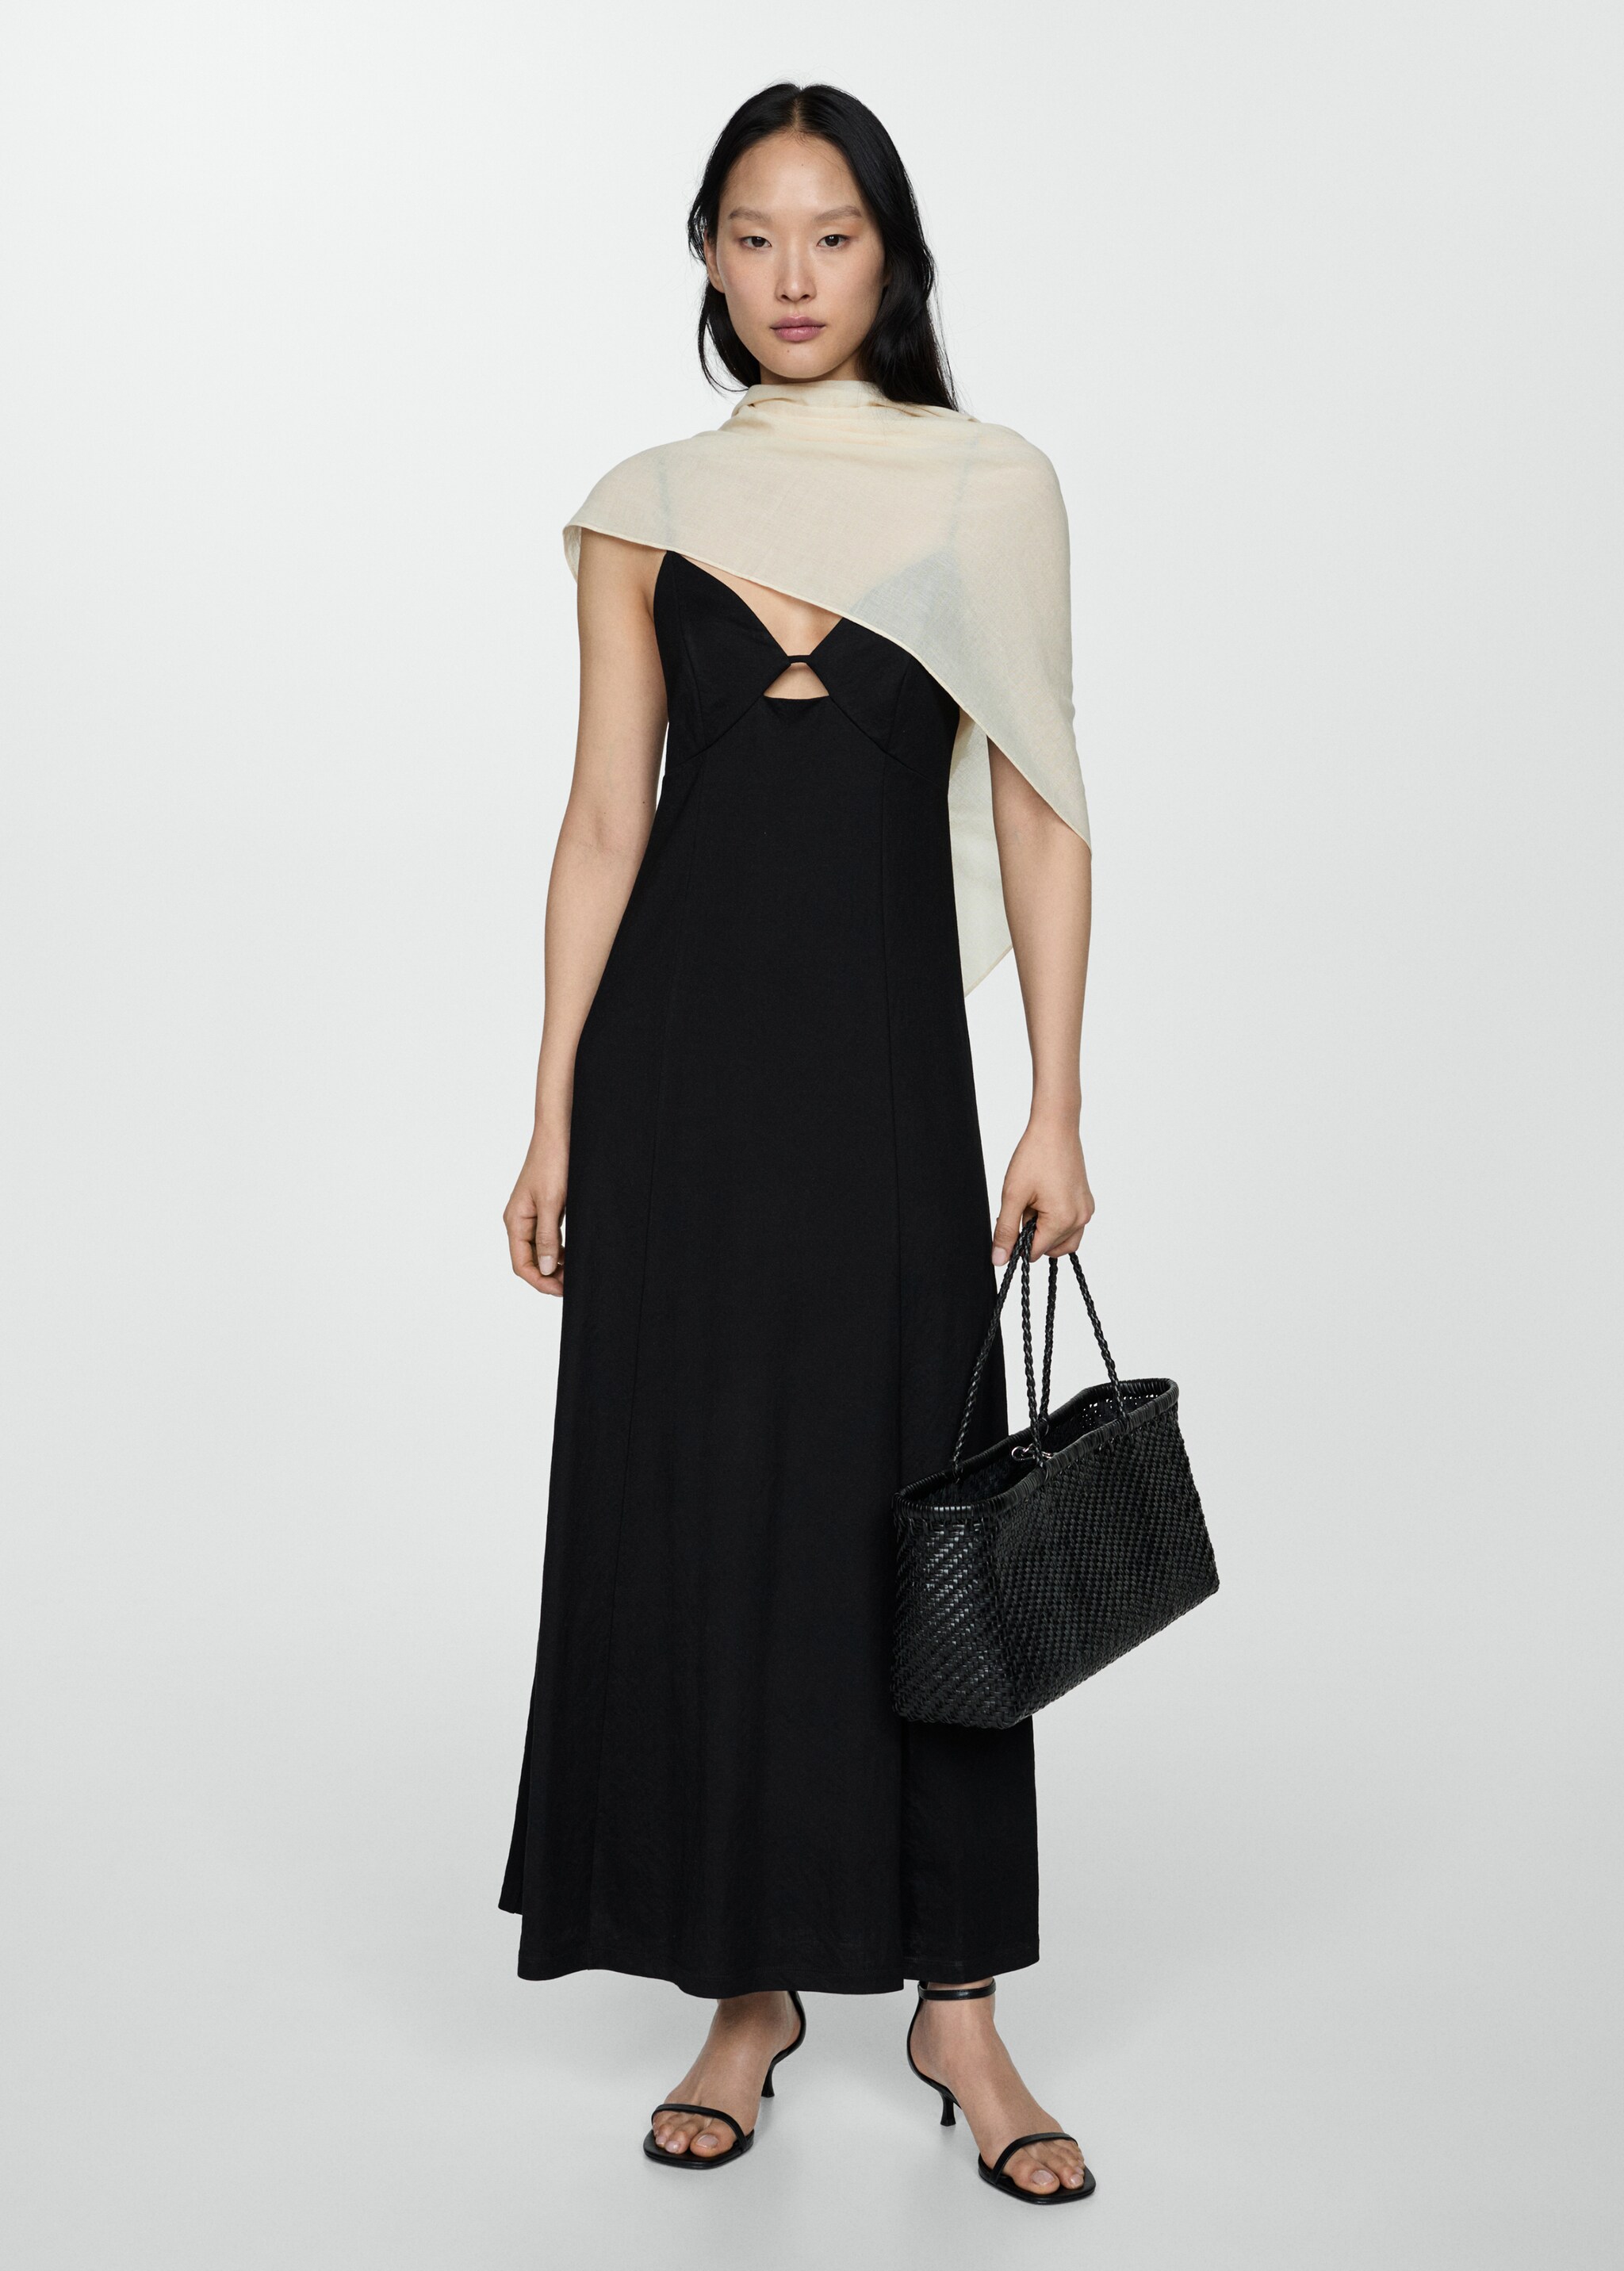 Long dress with straps - General plane